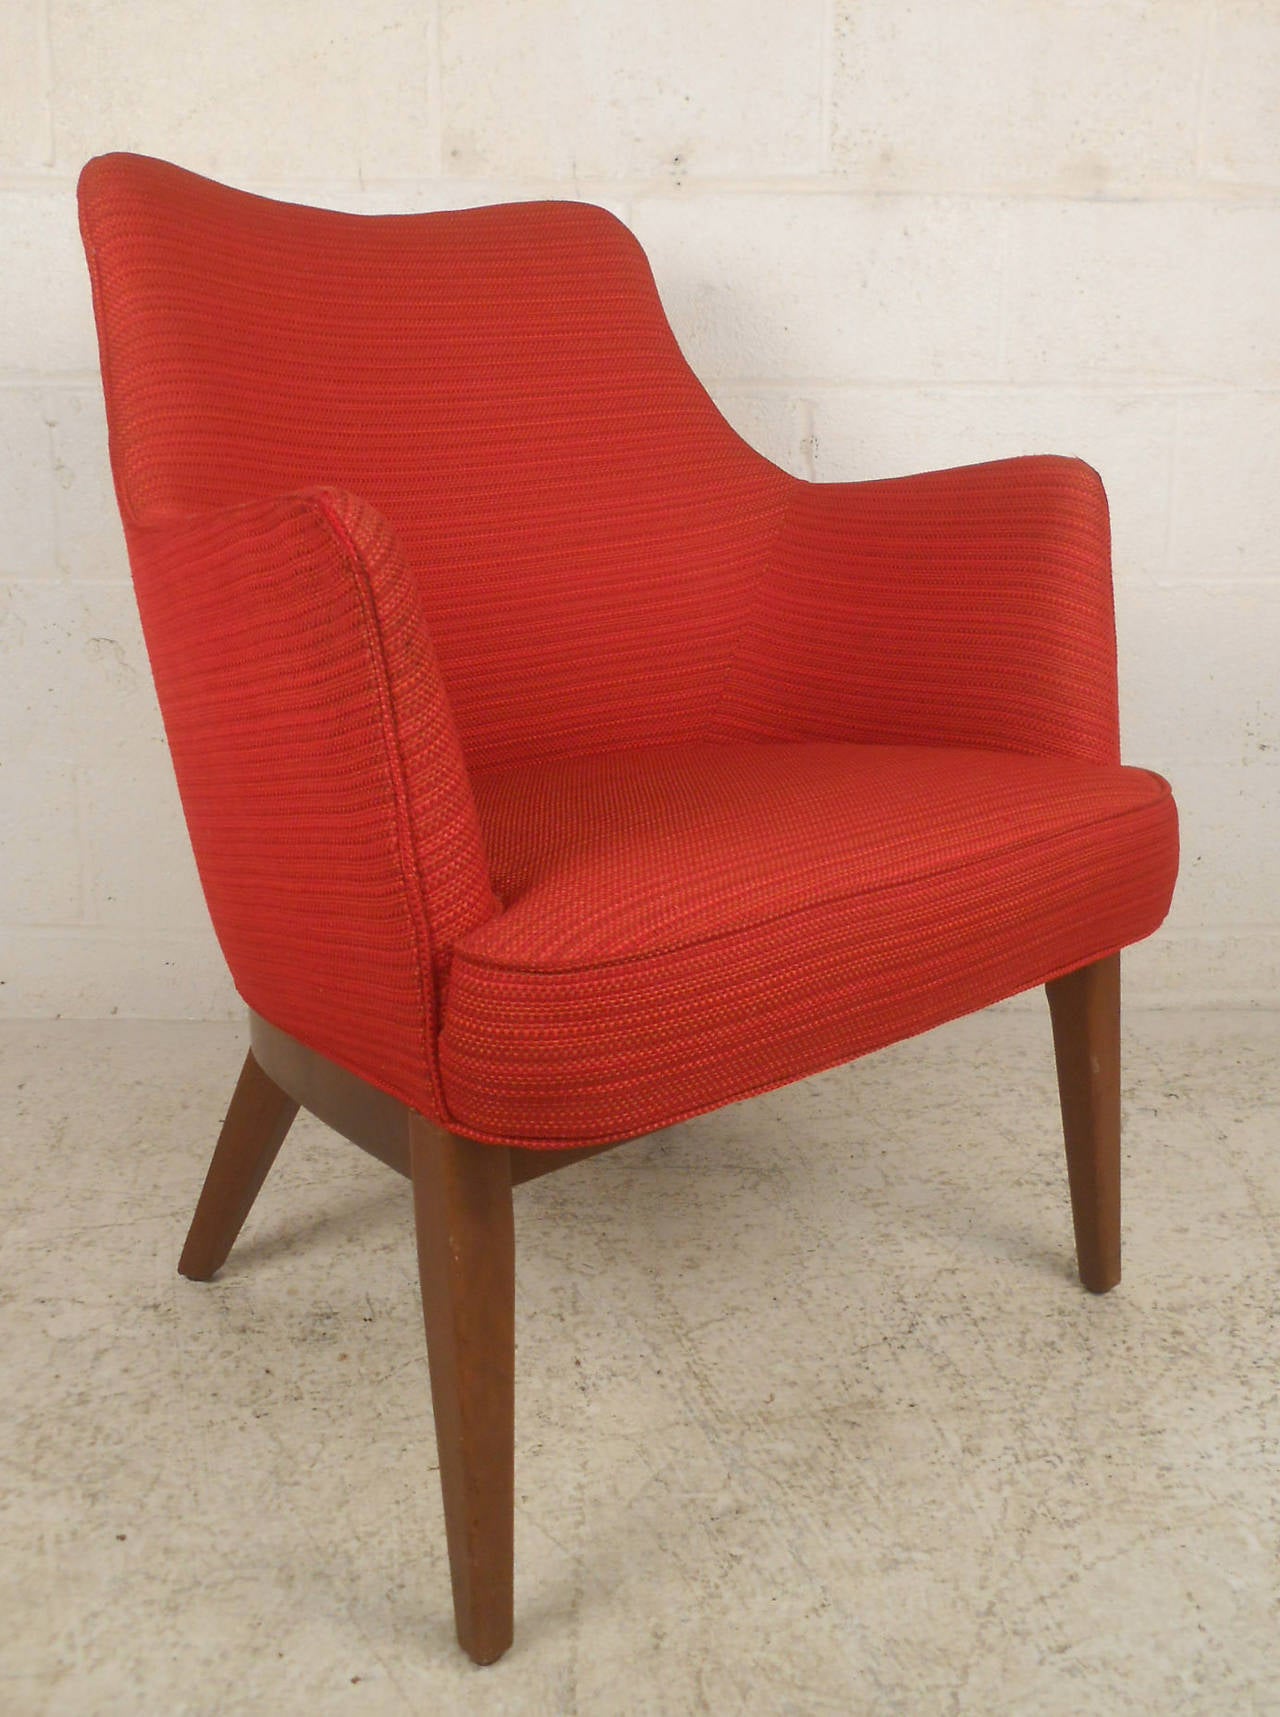 Danish vintage-modern matching upholstered lounge chair with tapered teak legs, designed in the manner of Mogens Lassen.

Price is for one chair, two in stock. Please confirm item location NY or NJ with dealer.